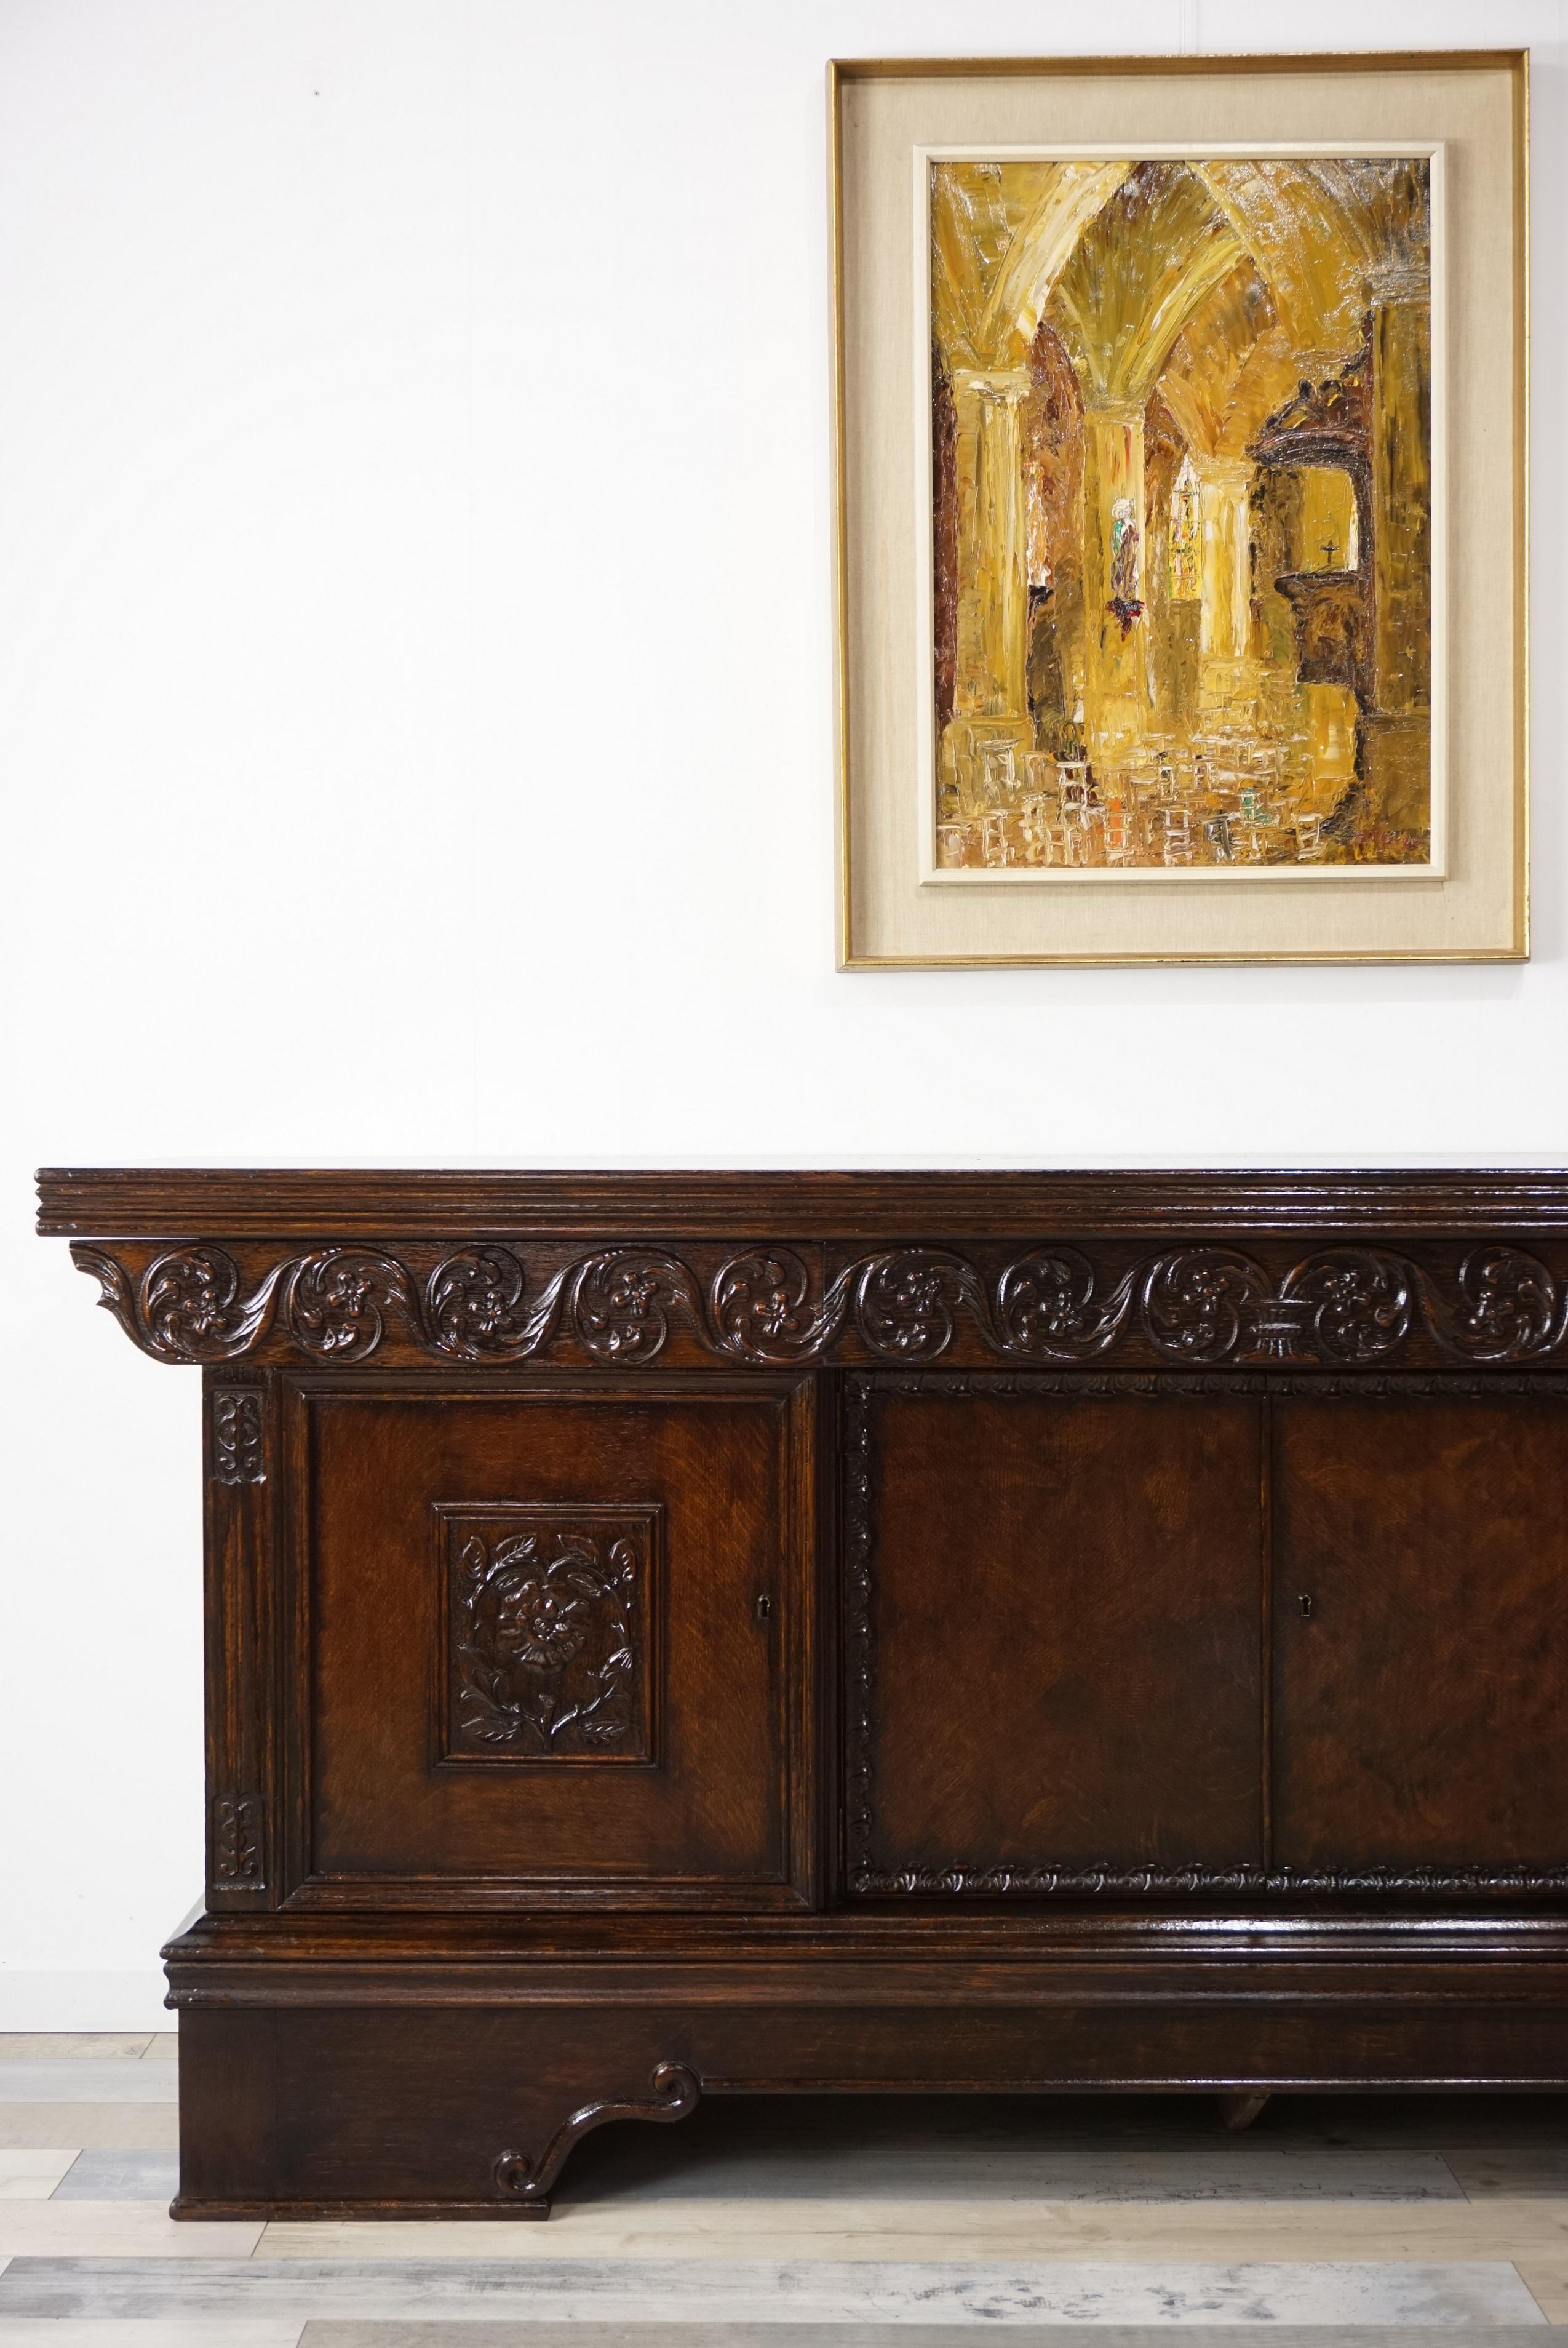 Antique Sideboard or Oak Wooden Buffet, 19th-Early 20th Century For Sale 6